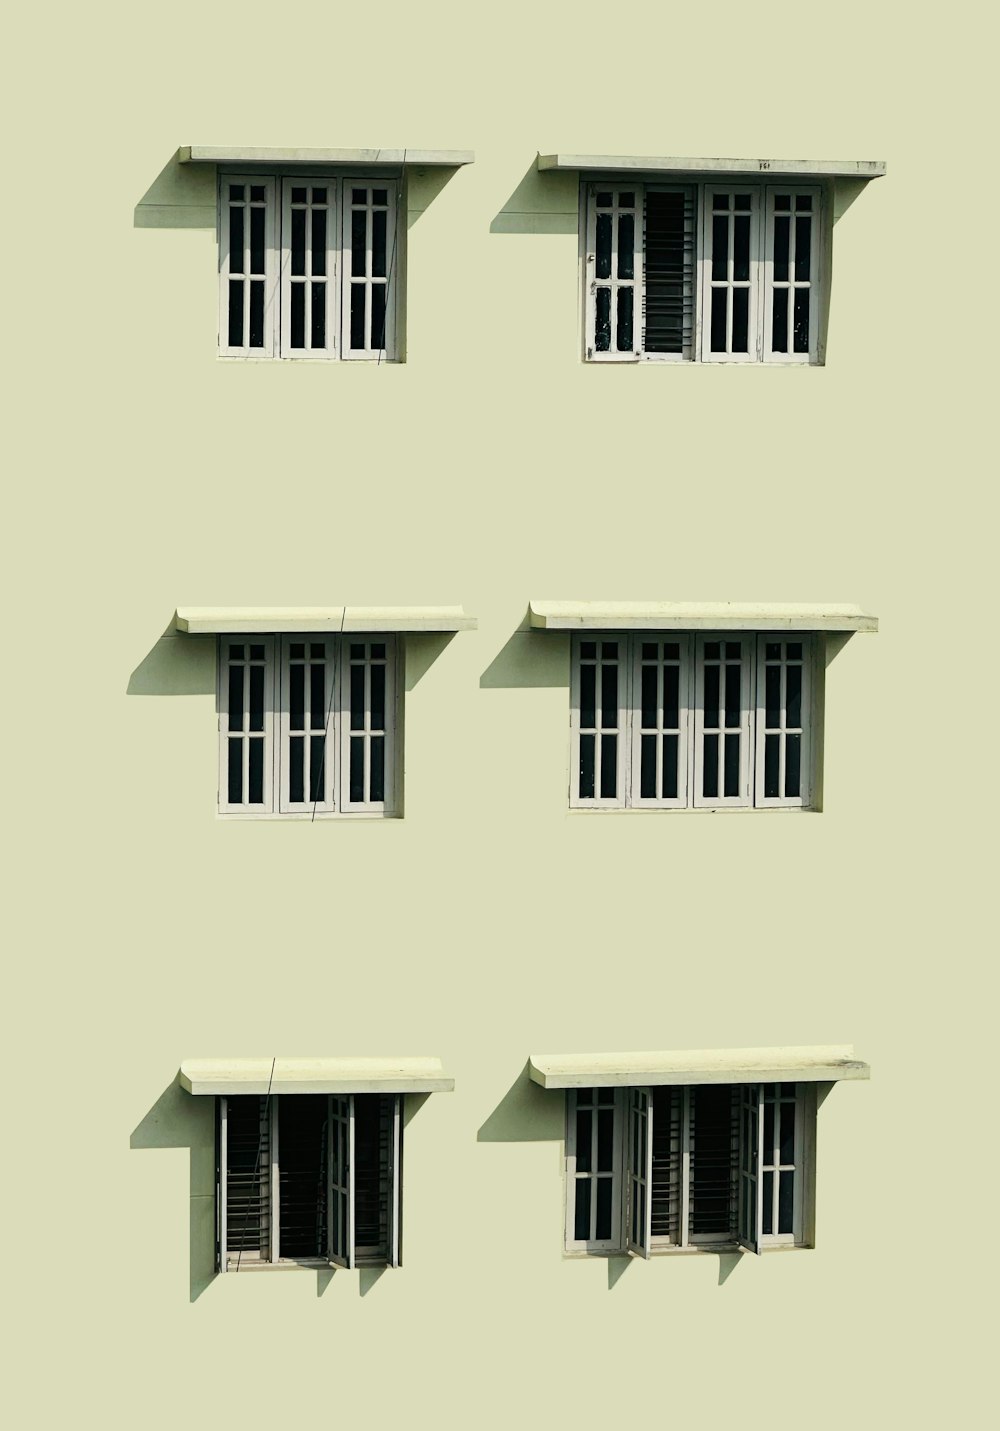 four windows with shutters on each of them